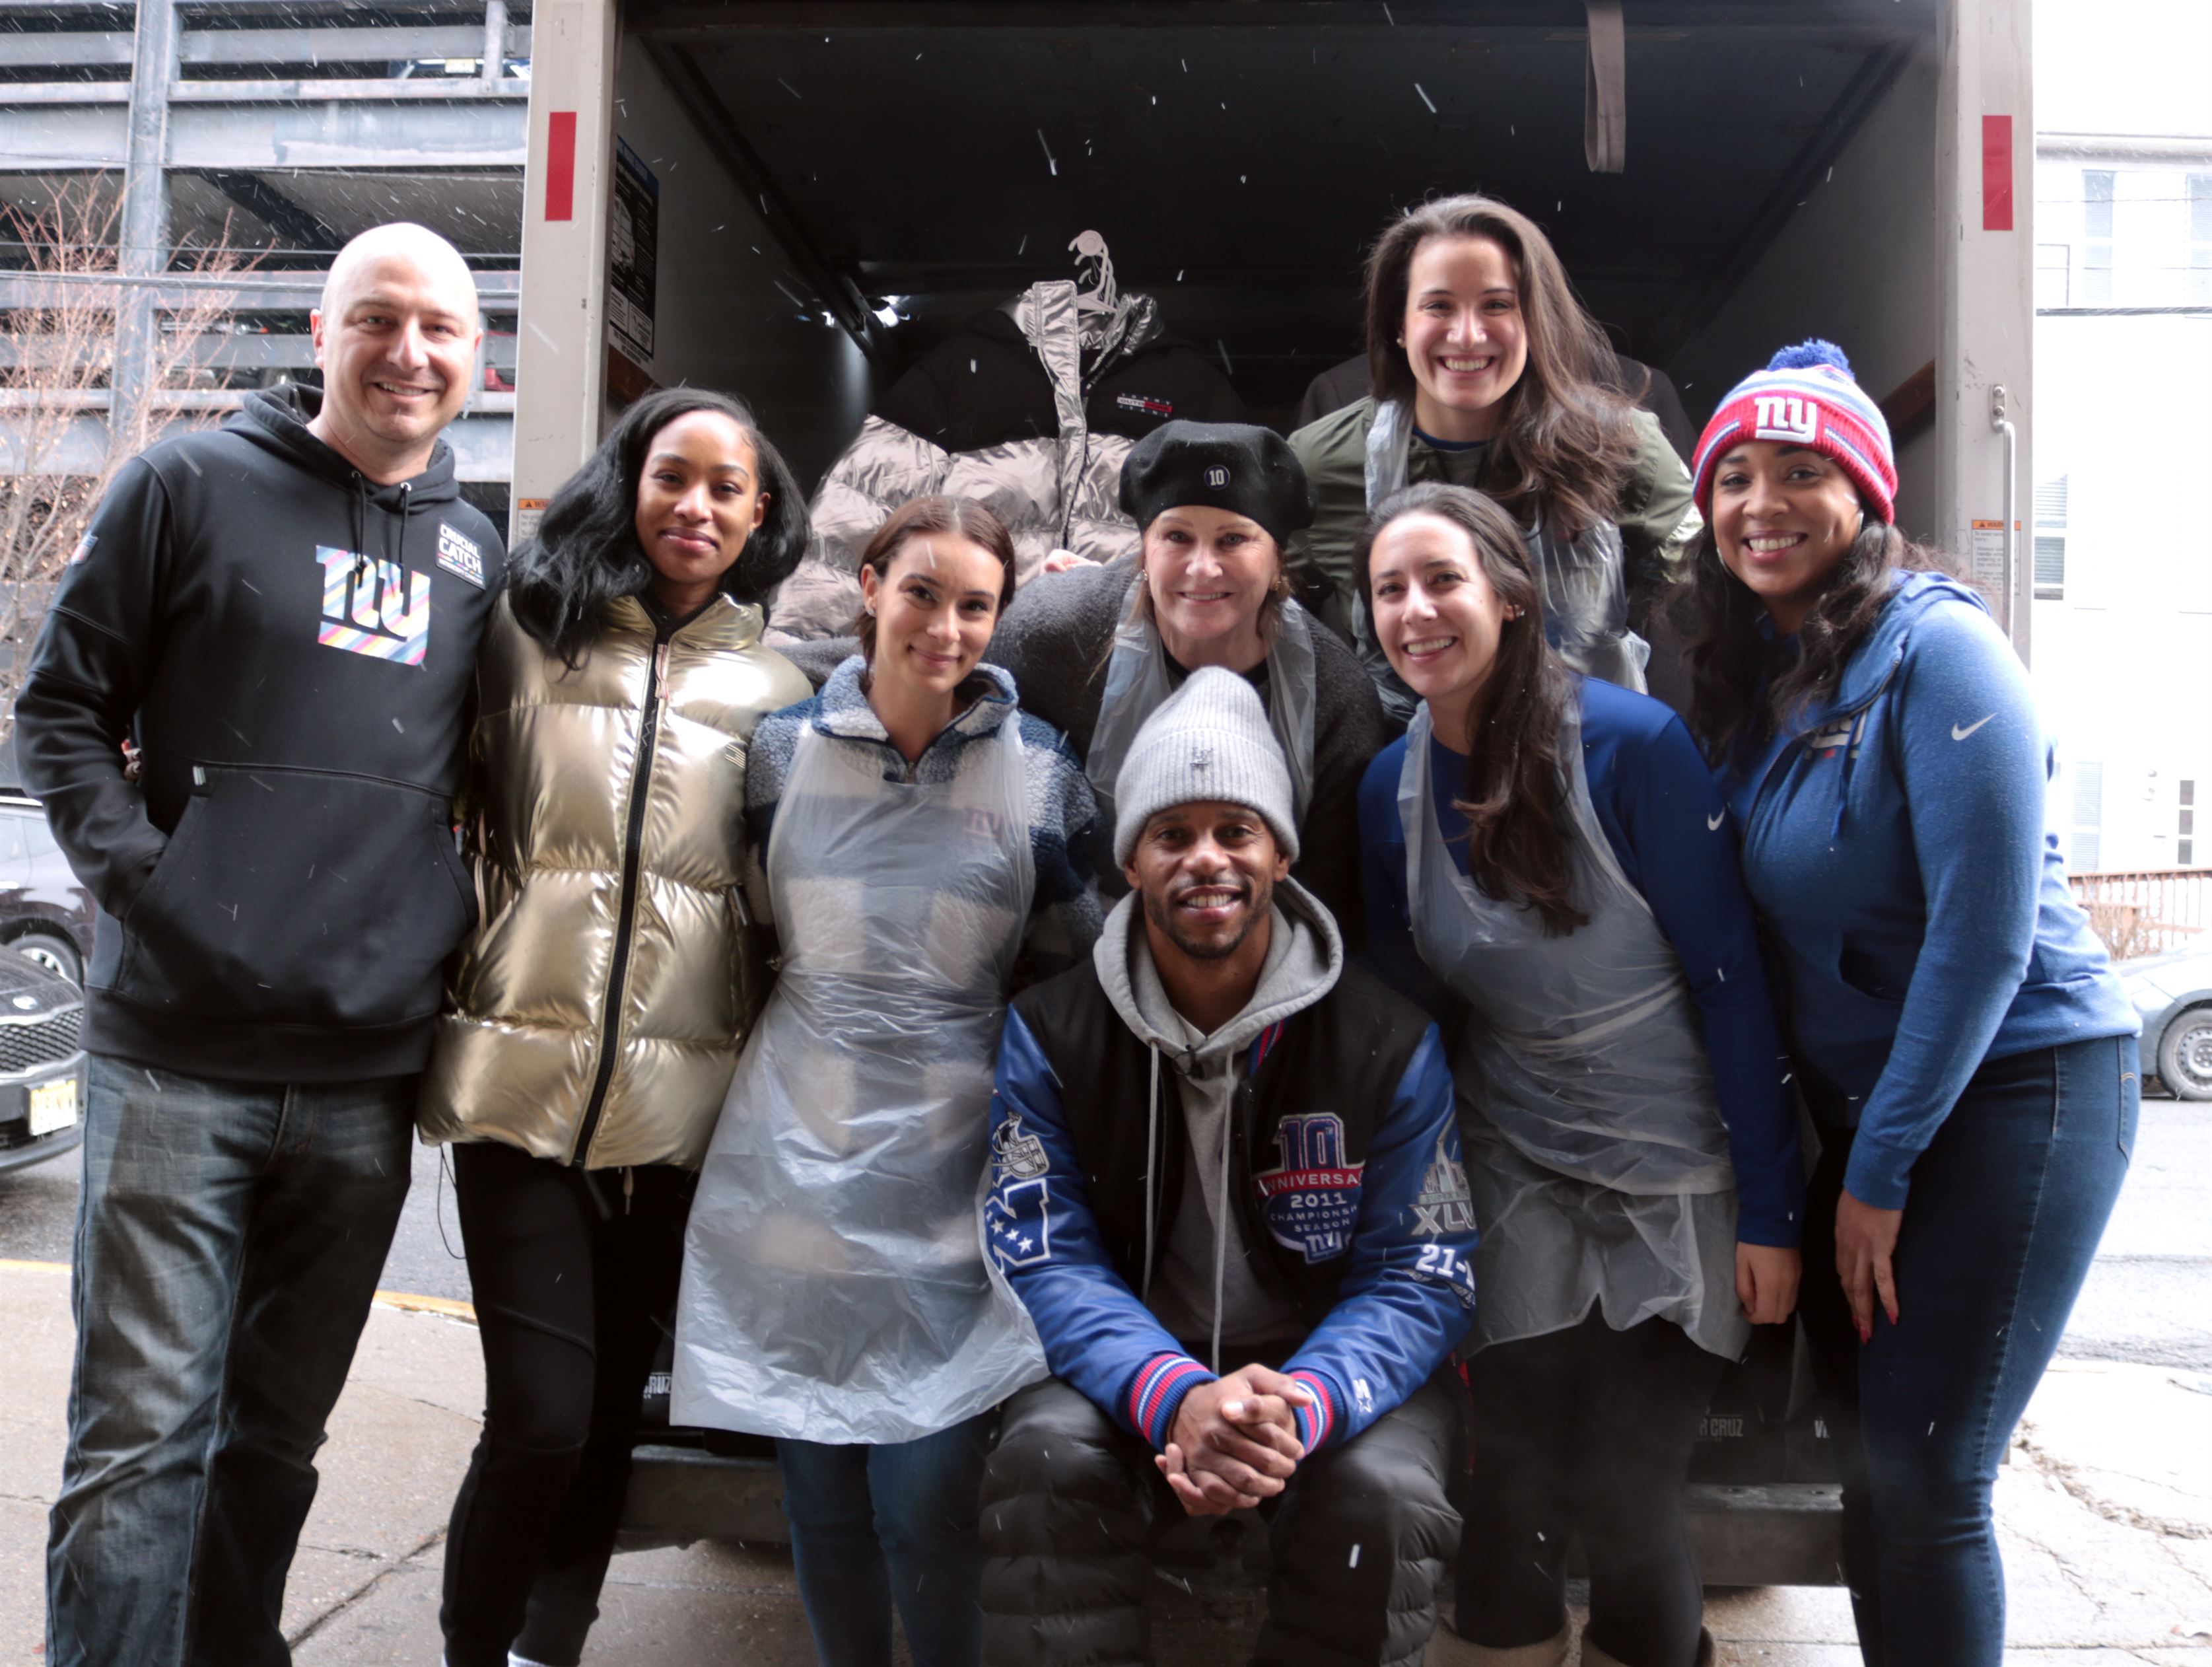 New York Giants continue their long-time partenership with Eva's Village to distribute around 350 freshly prepared lunches to Paterson. Photo courtesy of Monica Fernandez-Prato